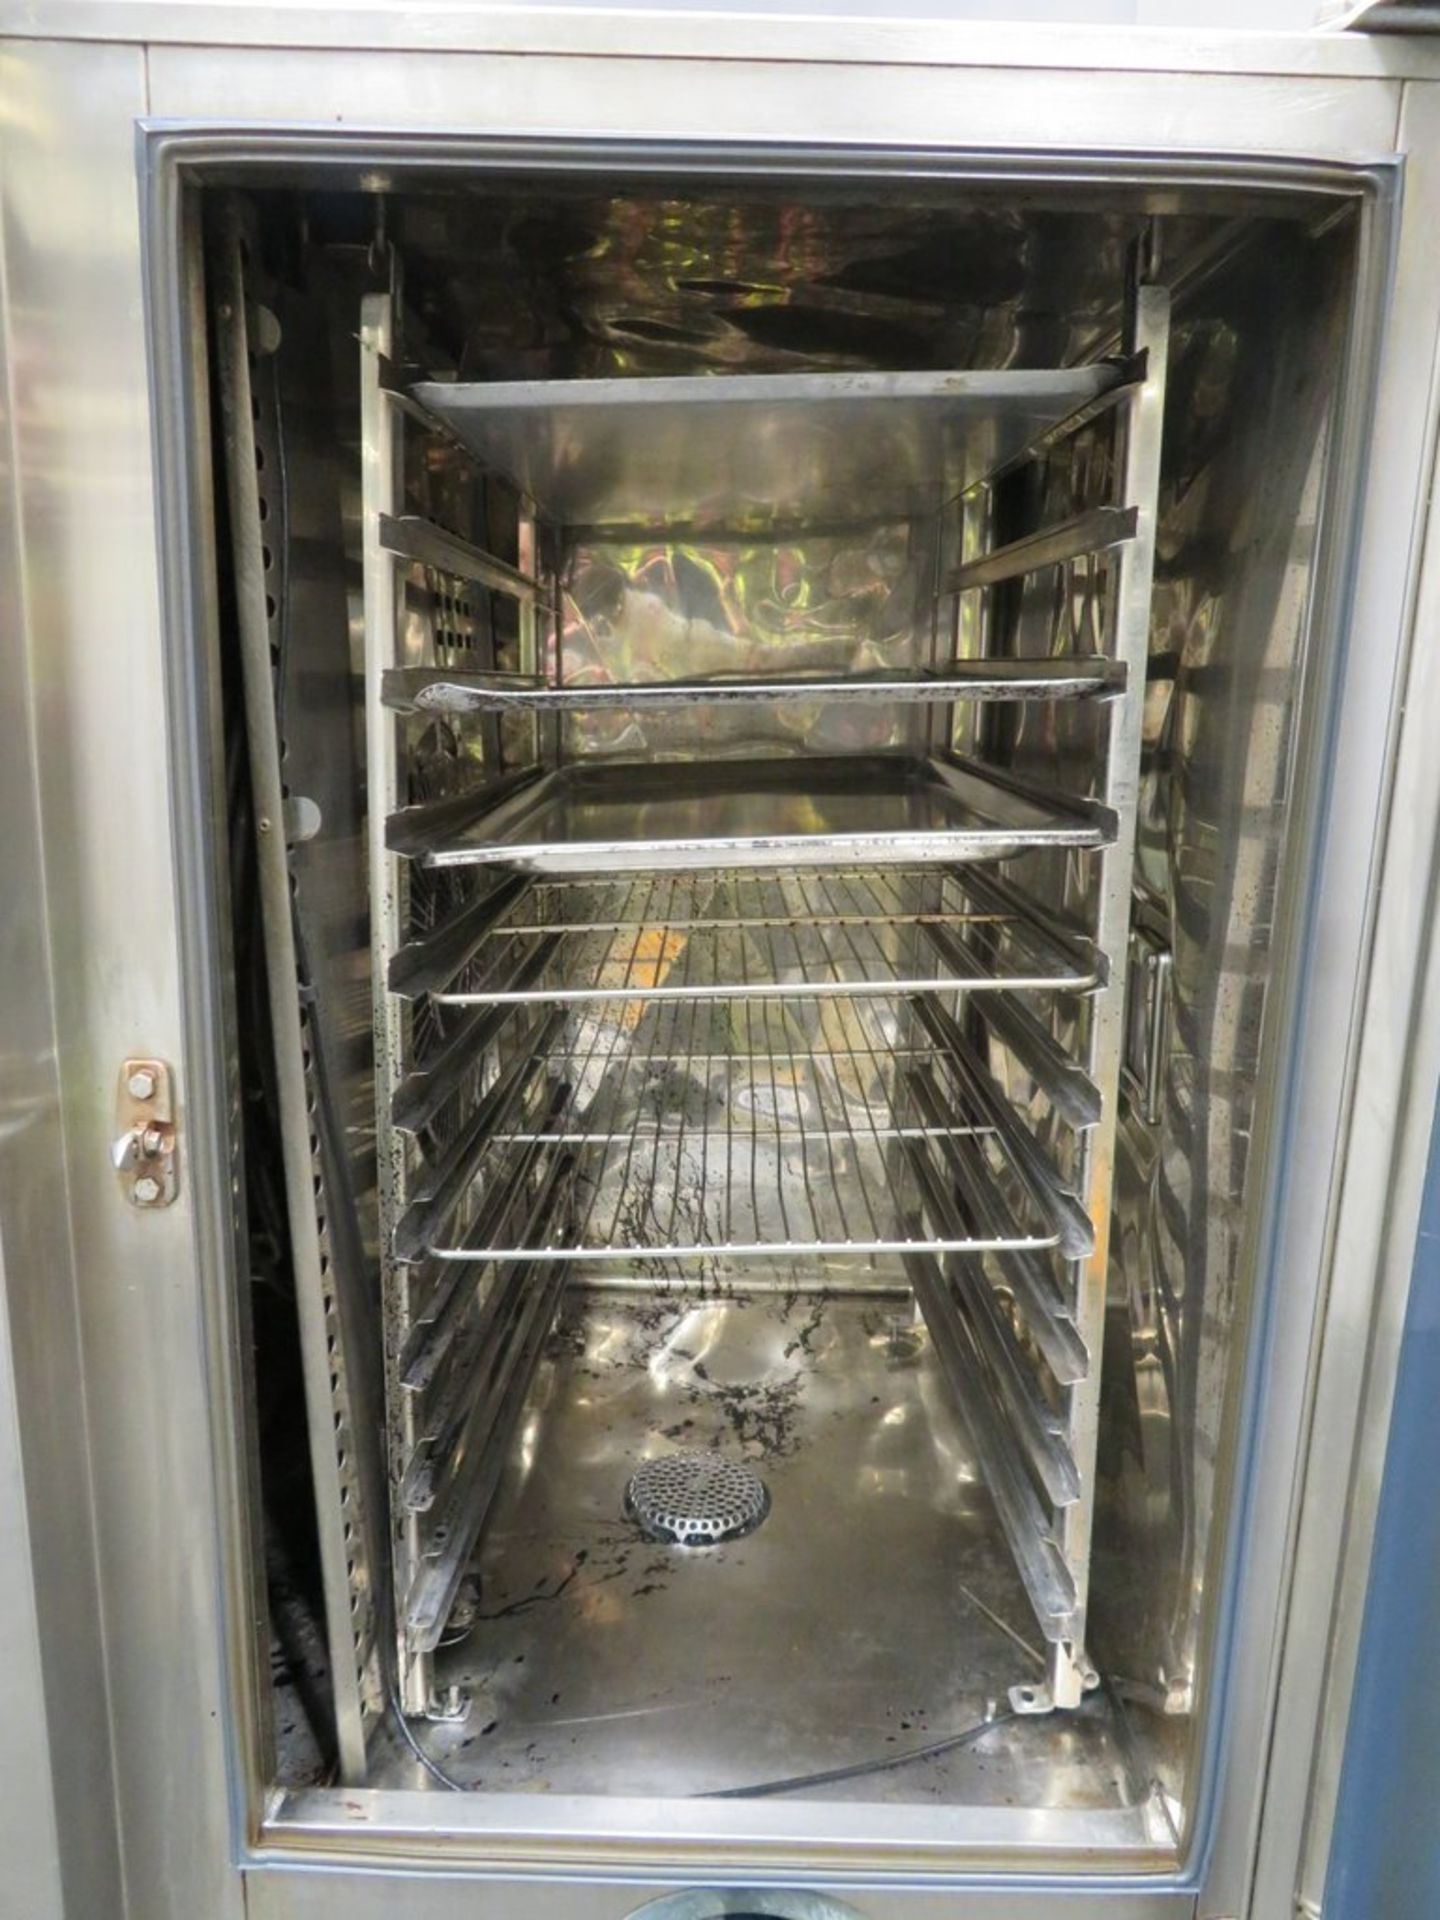 Rational SCC101 10 grid combi oven, 3 phase electric - Image 5 of 10